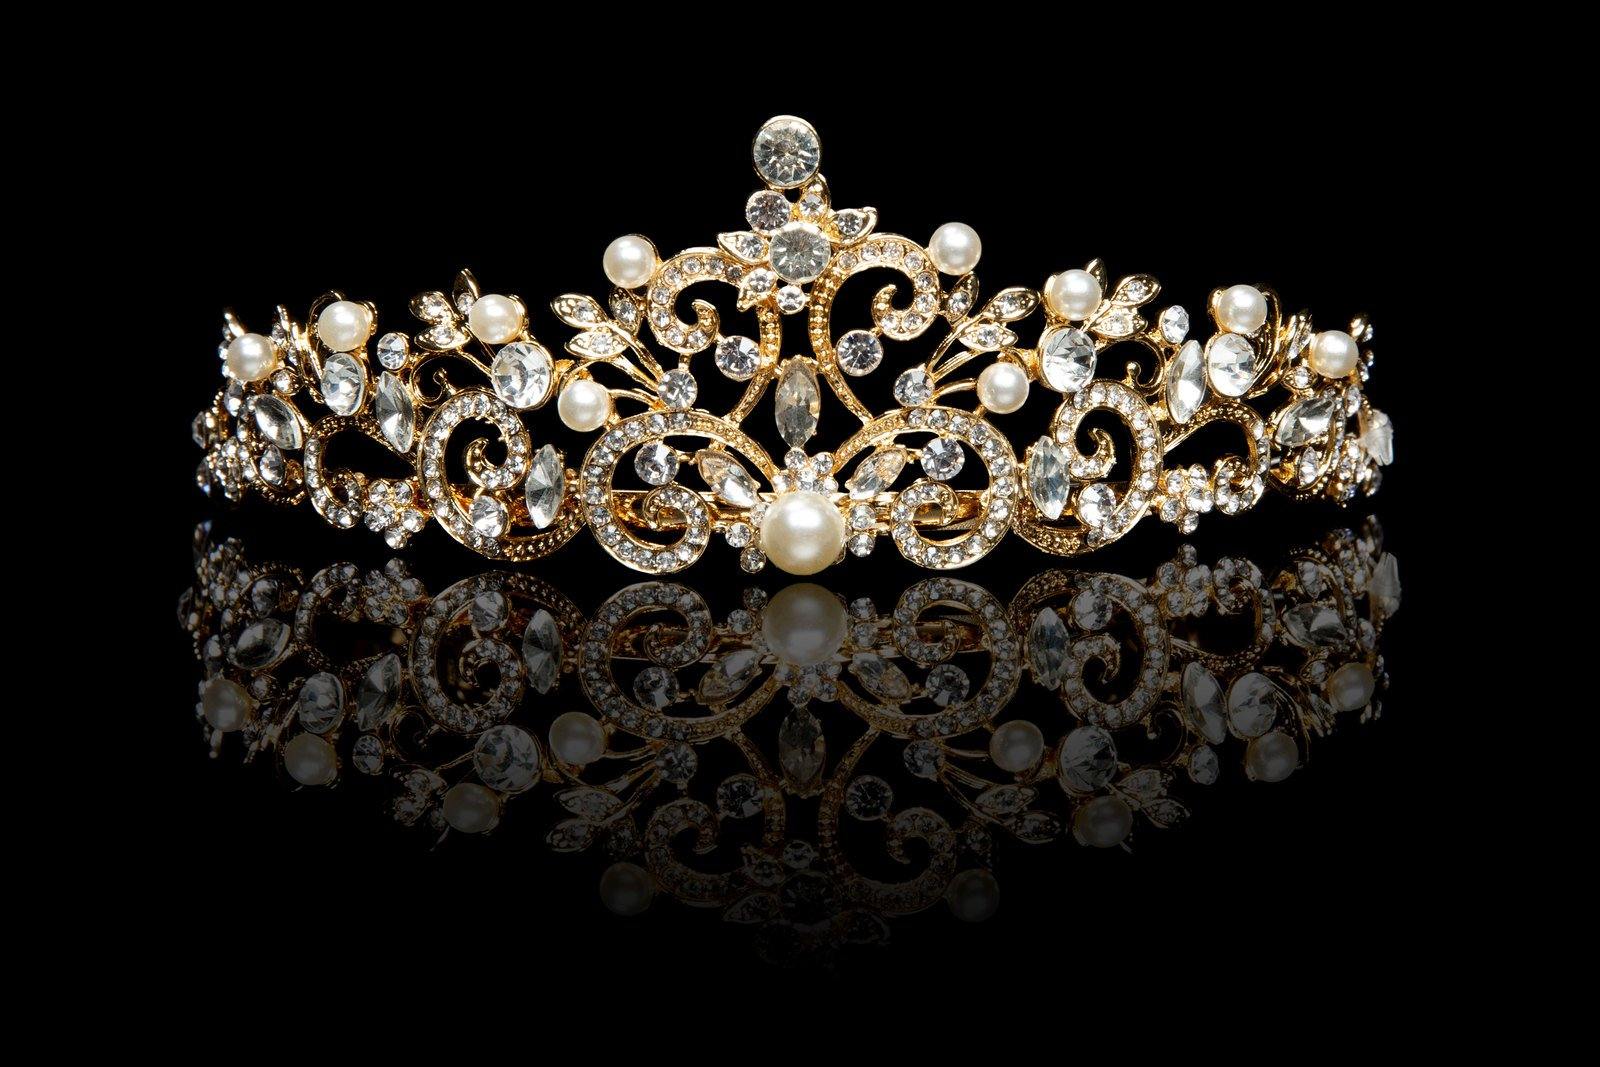 gold tiara mbellished with pearls and diamantes